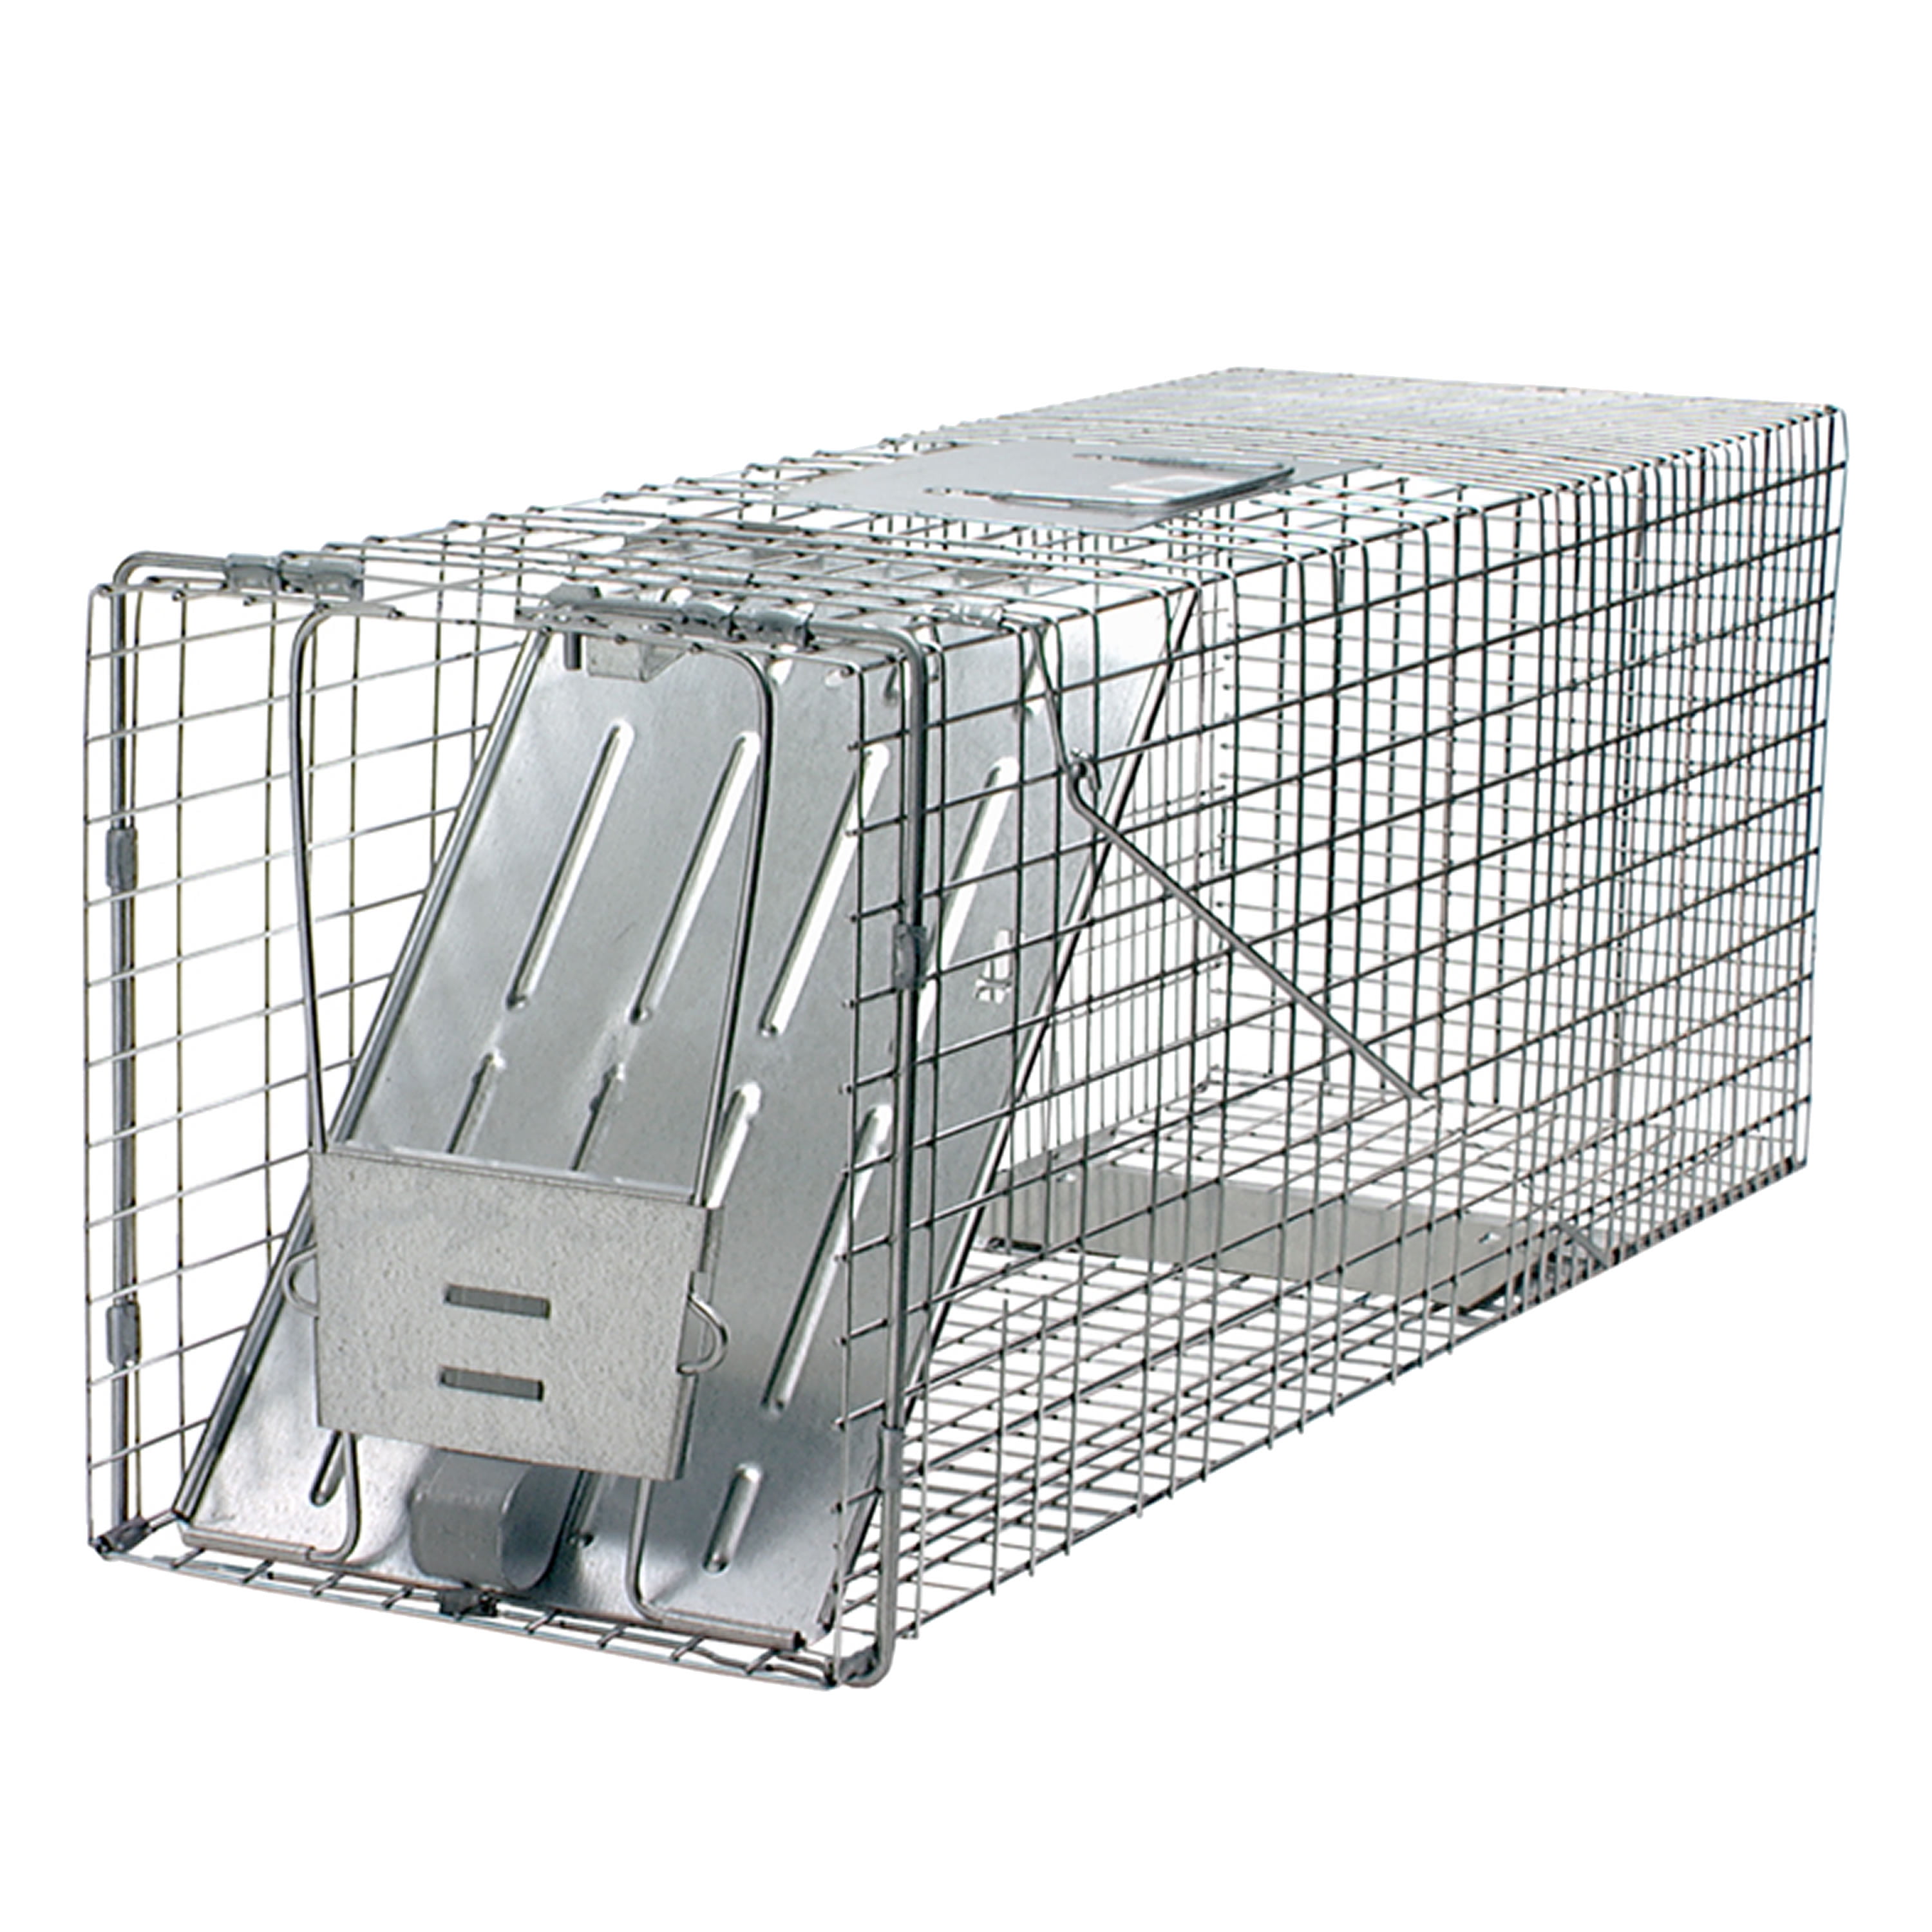 NEW 24" Live Animal Trap for Small Rodents & Animals 